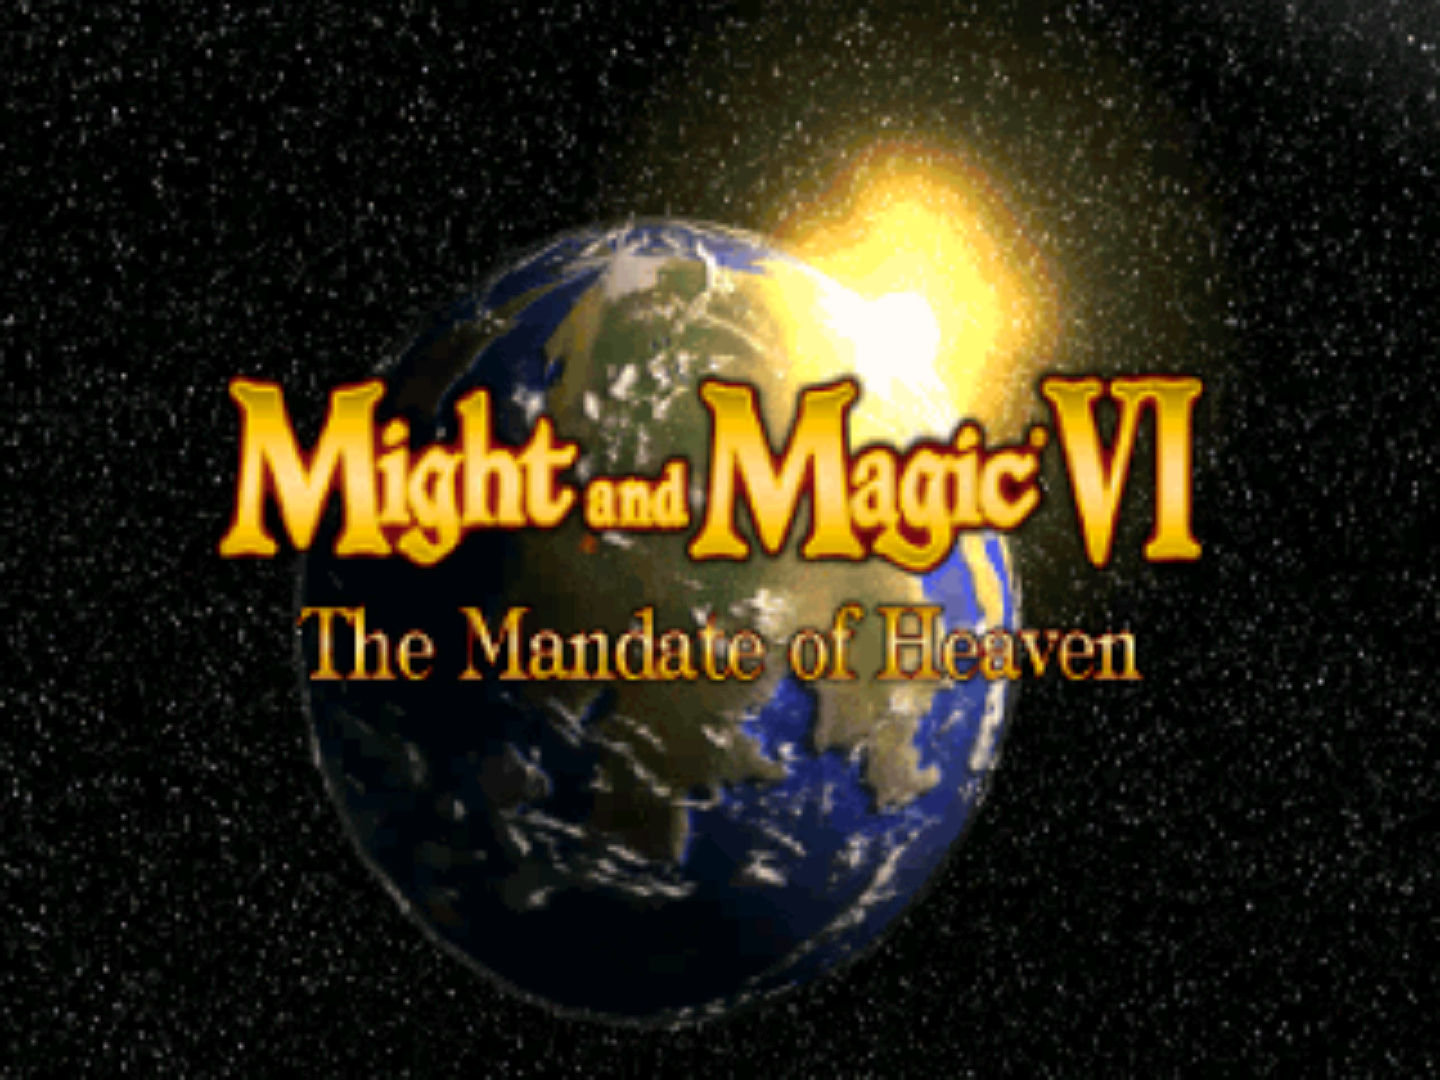 Might and Magic 6 title during intro video